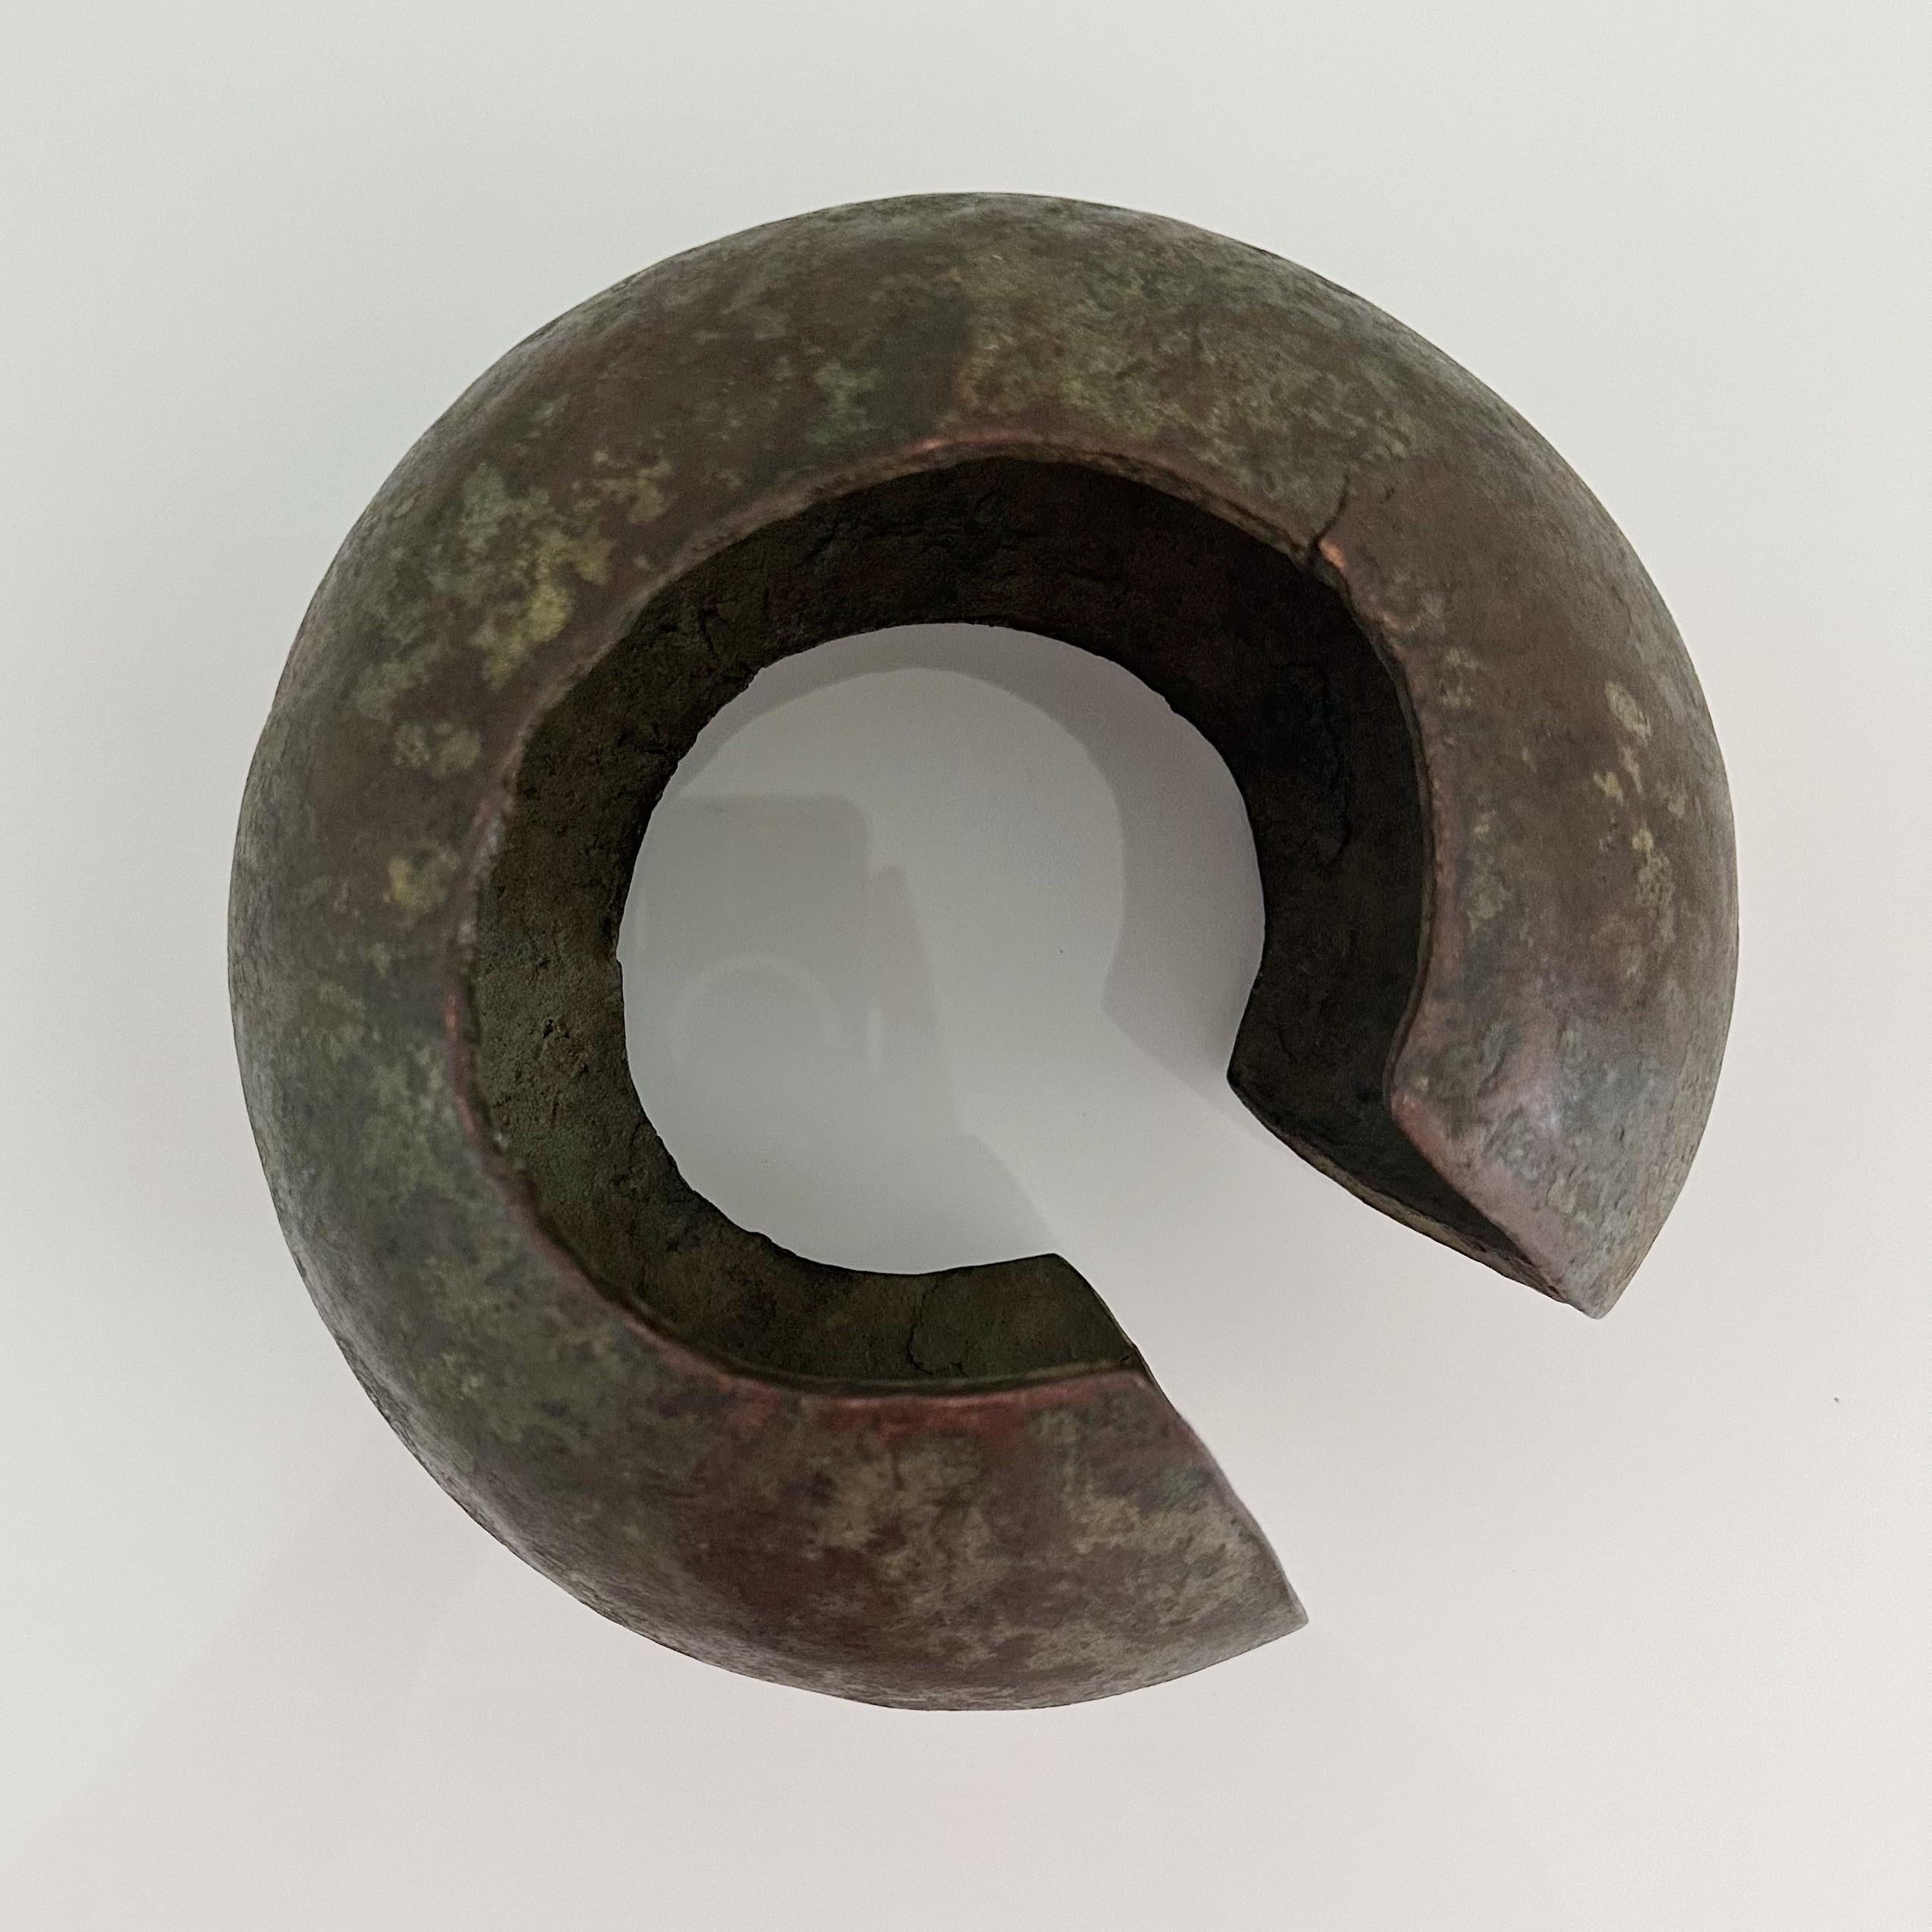 Initially crafted as foot cuffs, these African coins evolved over time, growing in size and weight, ultimately transforming into symbols of wealth and serving as a form of currency. Constructed from patinated copper, they exhibit a distinct